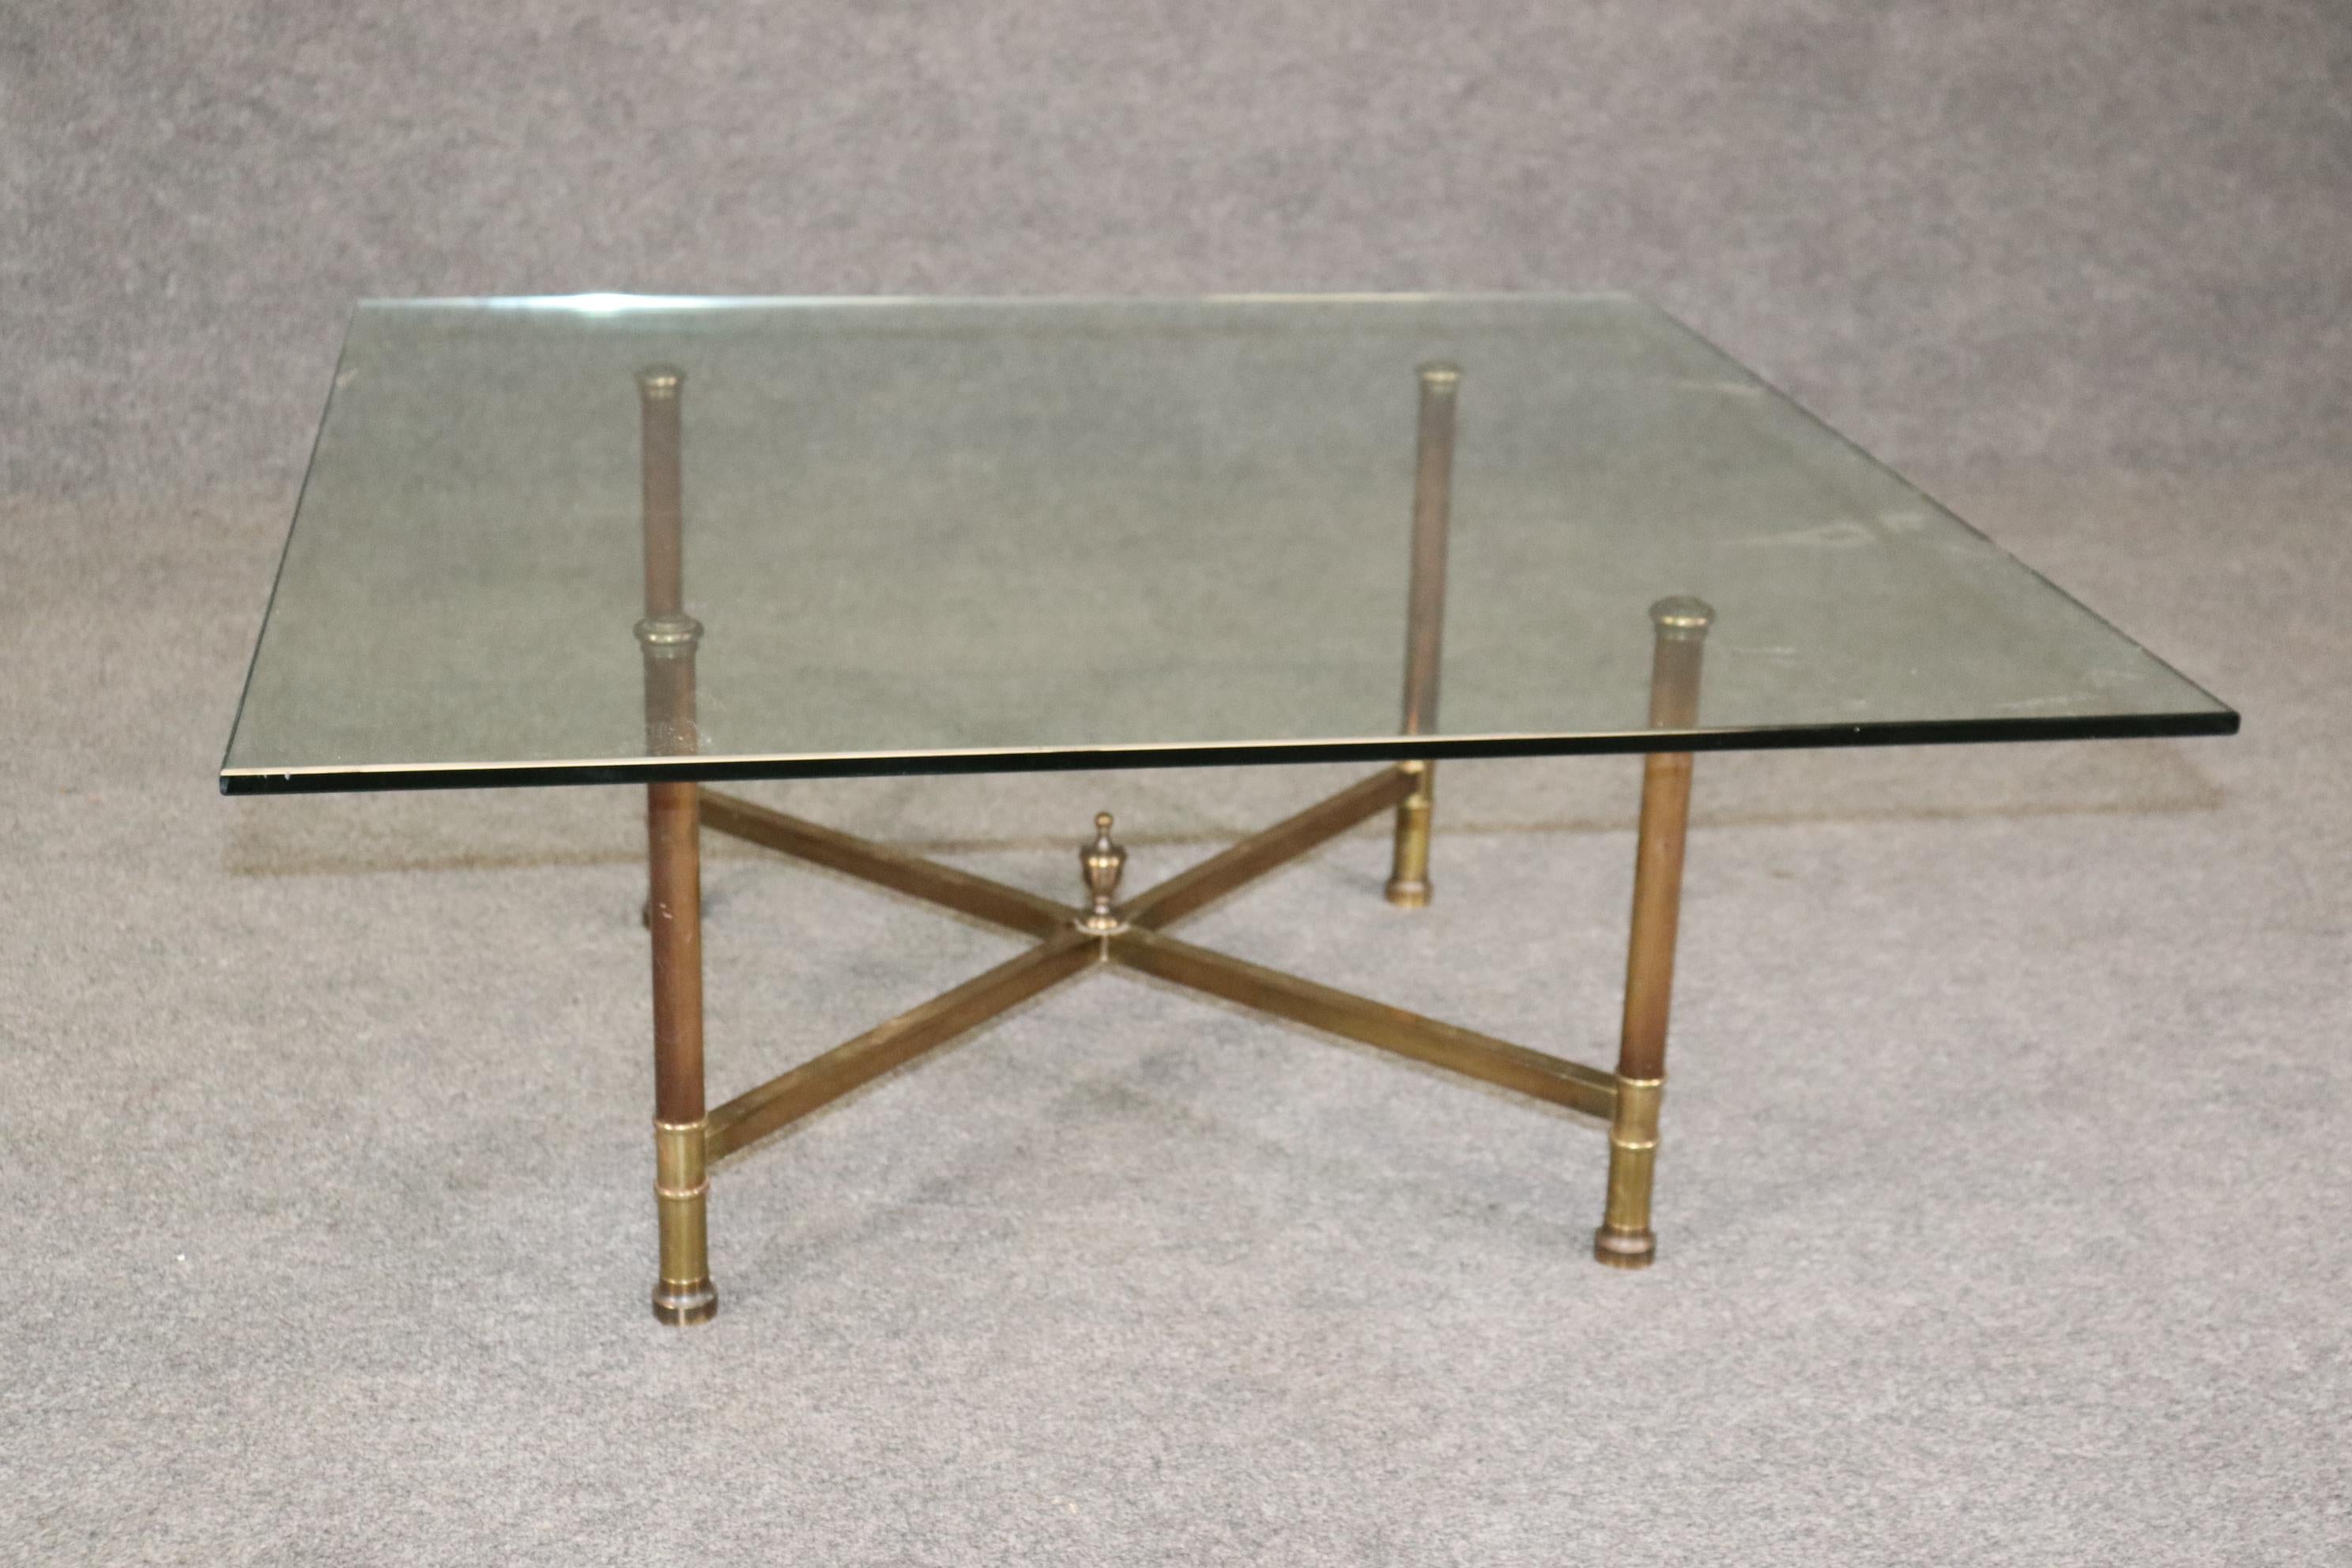 20th Century French Signed Maison Jansen Paris Regency Style Brass Glass Top Coffee Table For Sale